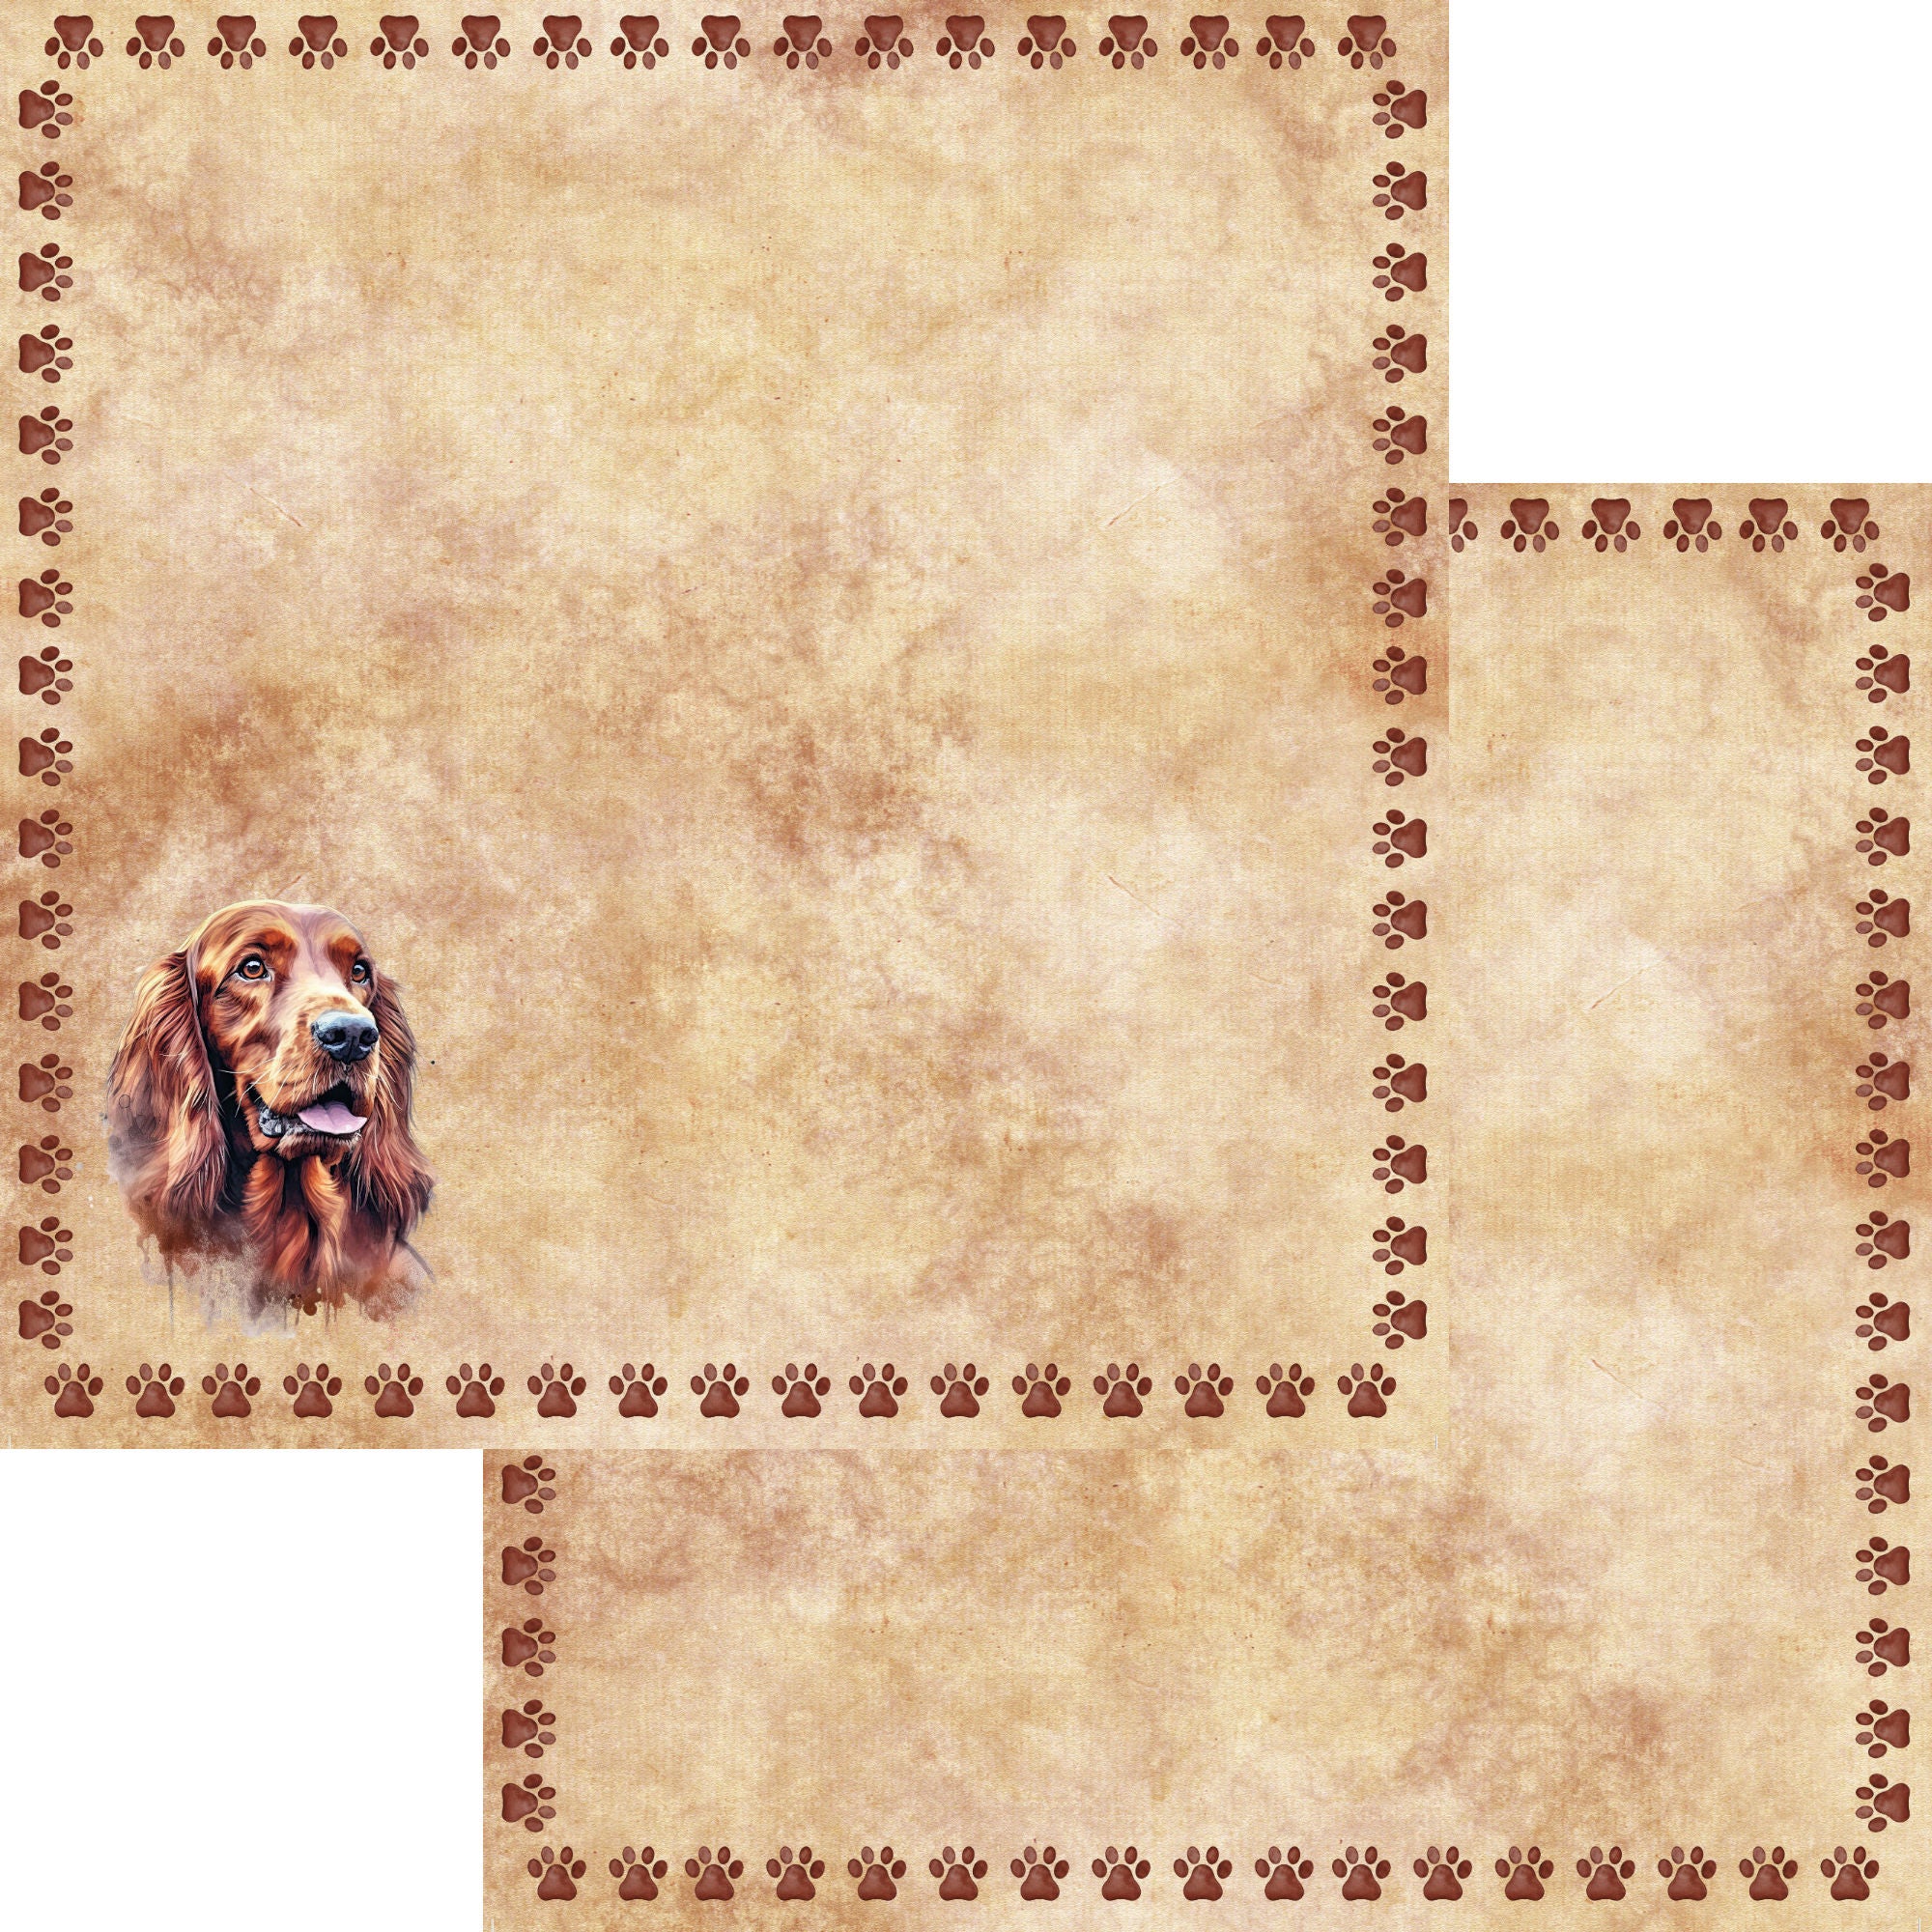 Dog Breeds Collection Irish Setter 12 x 12 Double-Sided Scrapbook Paper by SSC Designs